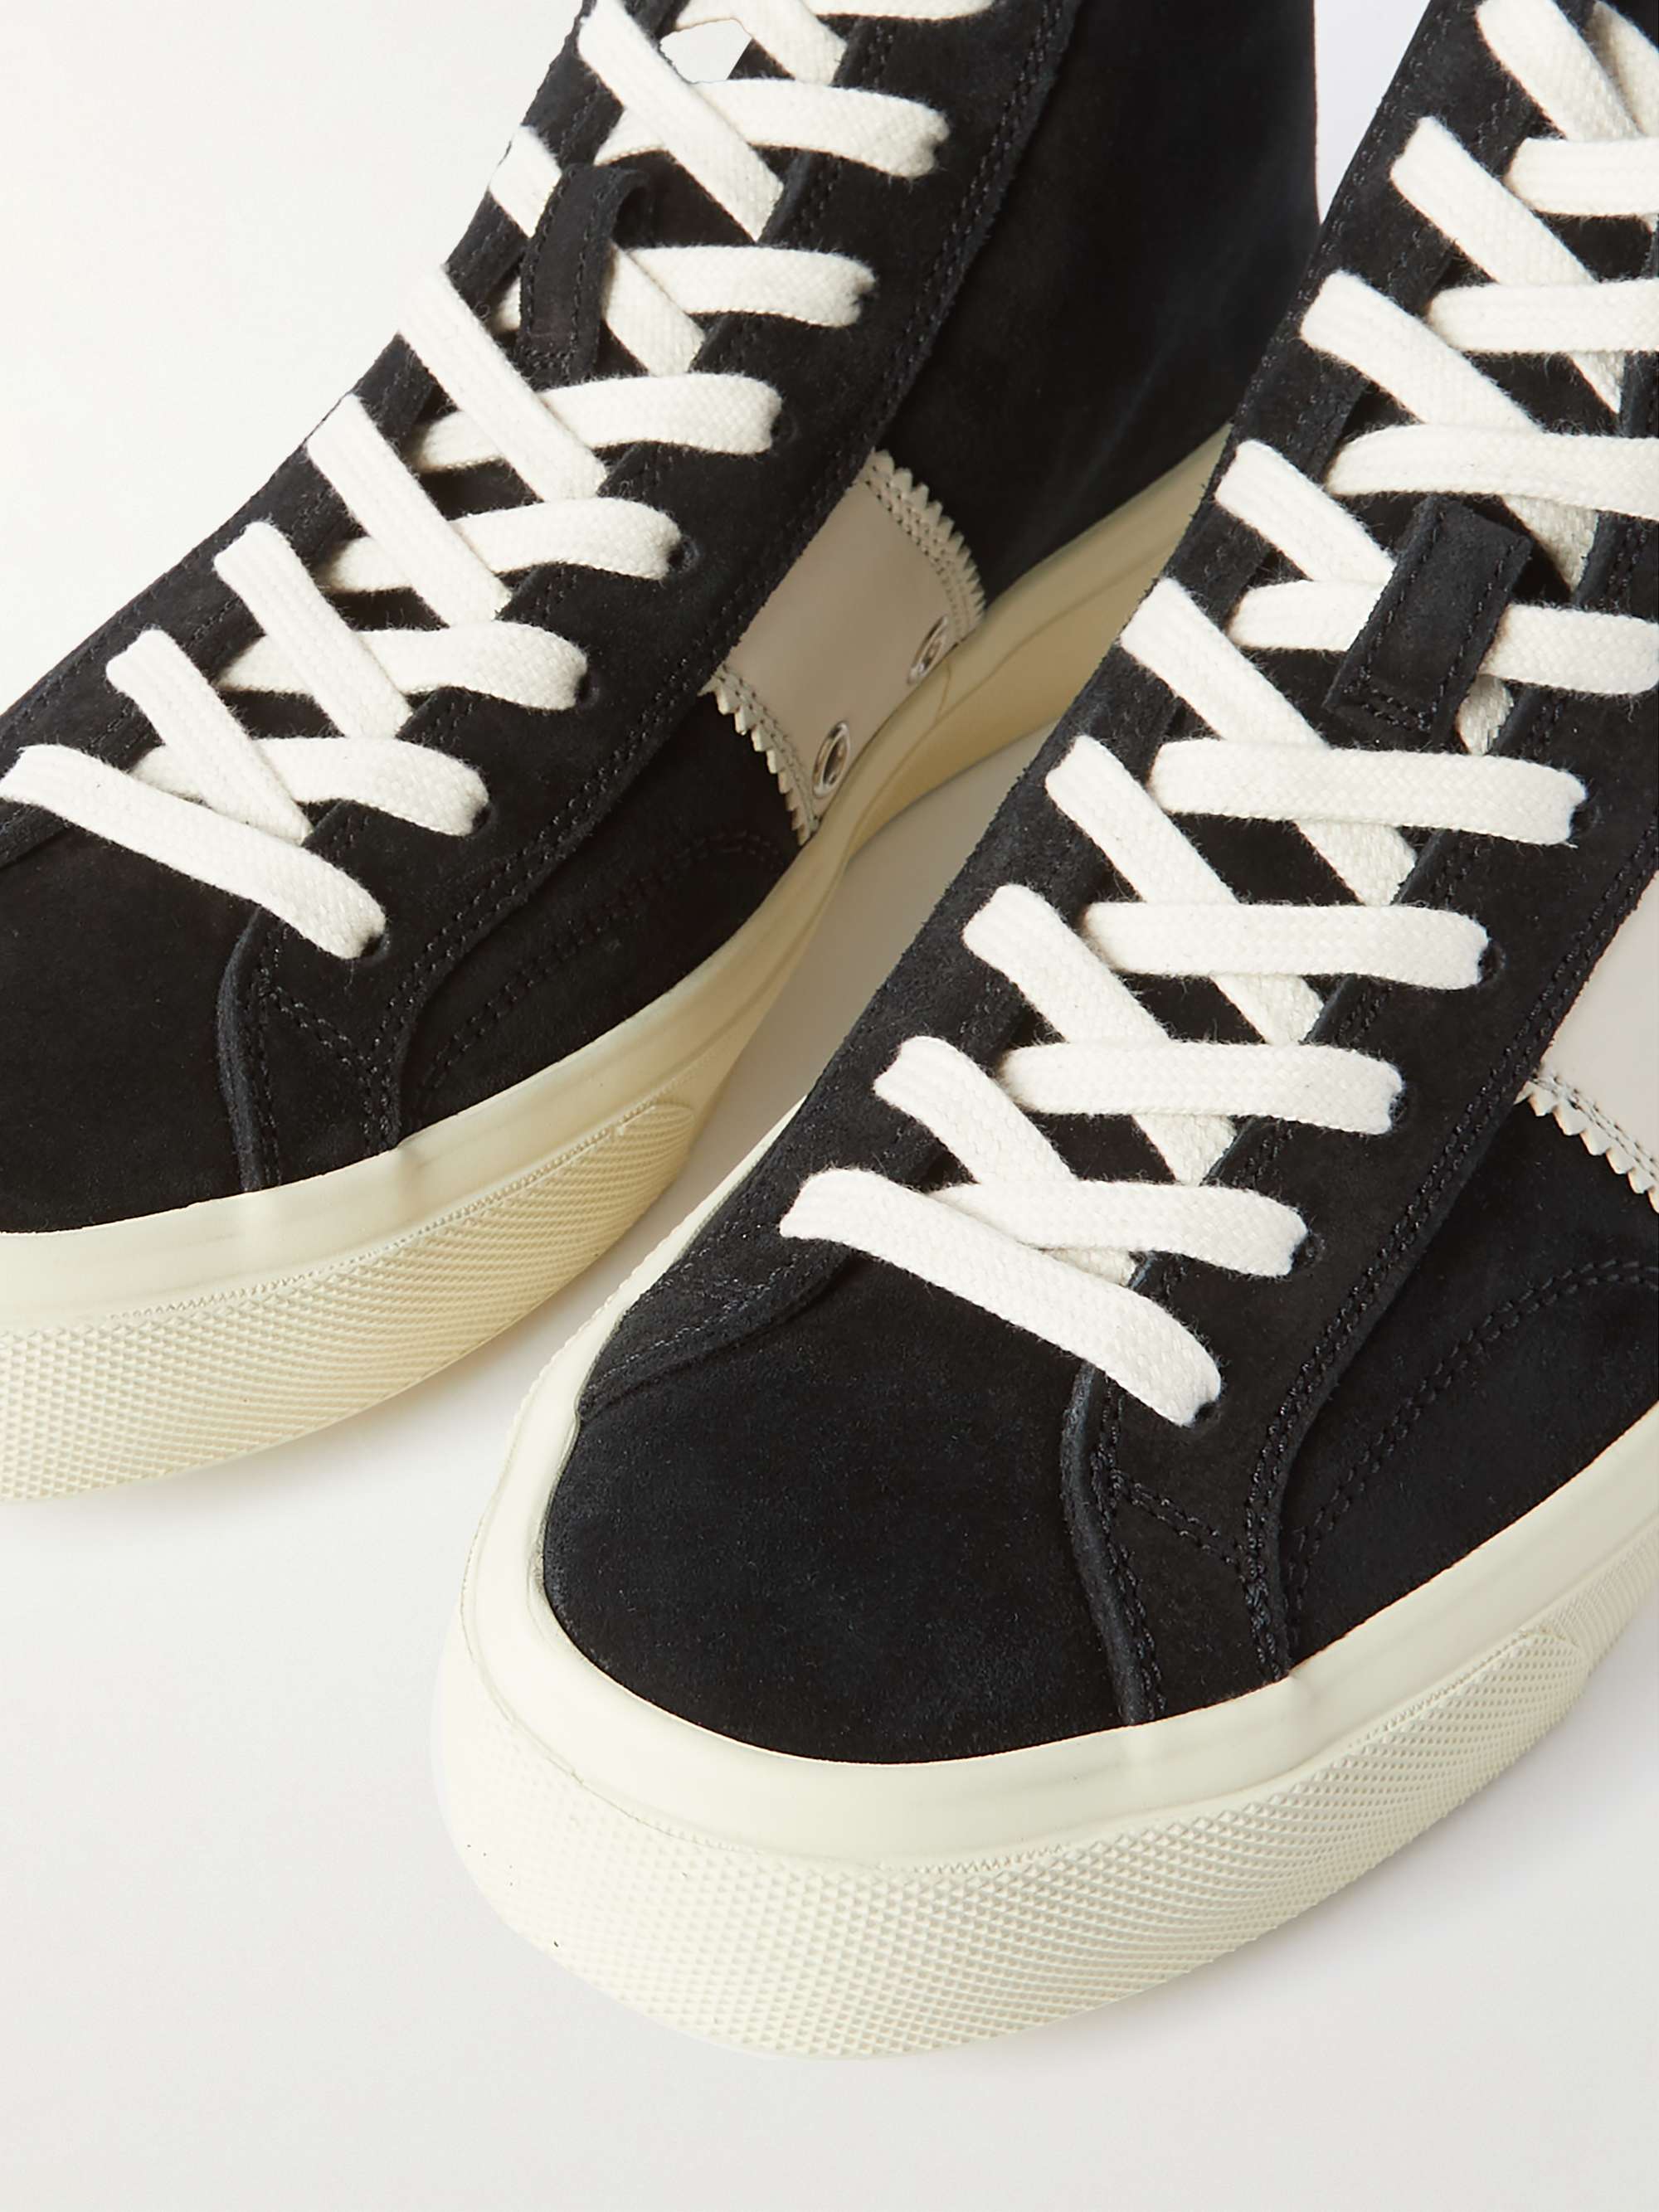 TOM FORD Cambridge Leaher-Trimmed Suede High-Top Sneakers